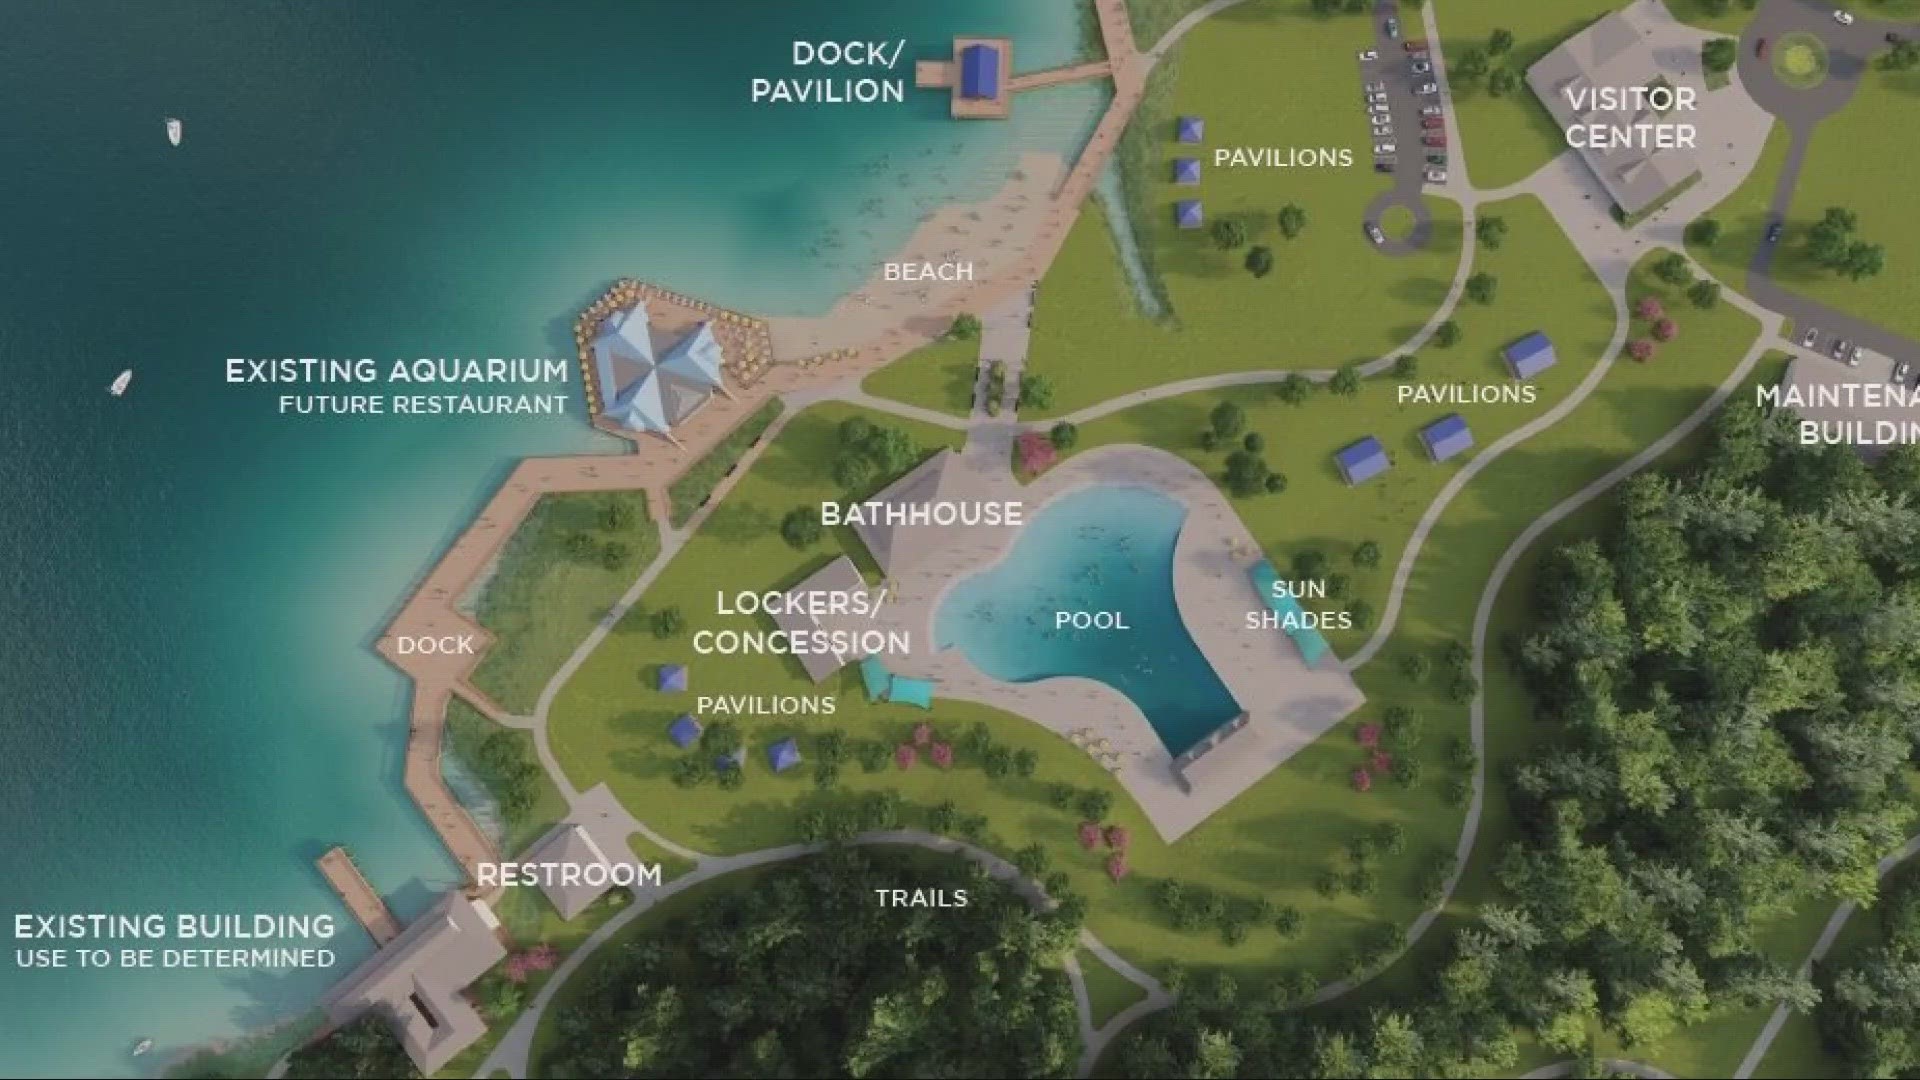 Aurora plans to buy Geauga Lake and 40 acres of land for park